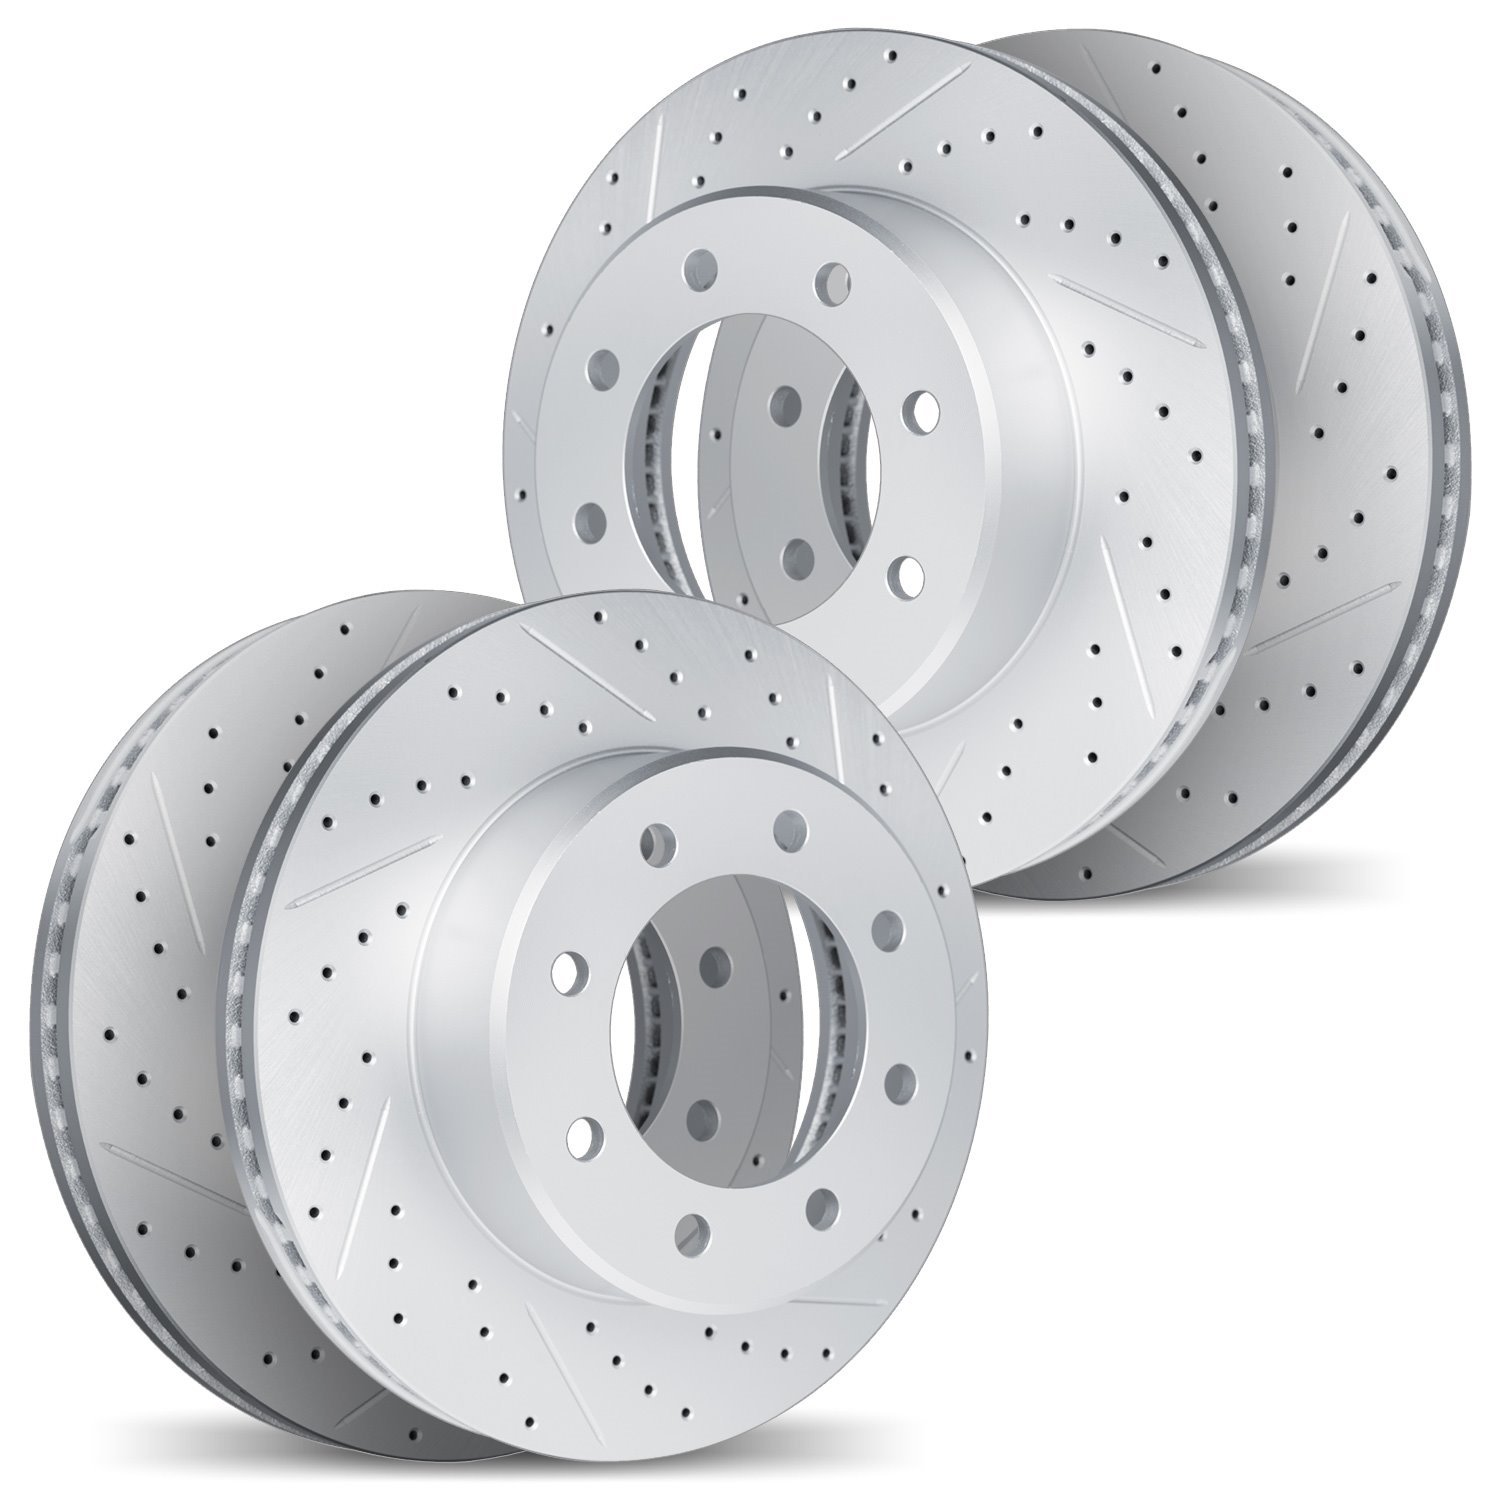 2004-54033 Geoperformance Drilled/Slotted Brake Rotors, 2003-2007 Ford/Lincoln/Mercury/Mazda, Position: Front and Rear